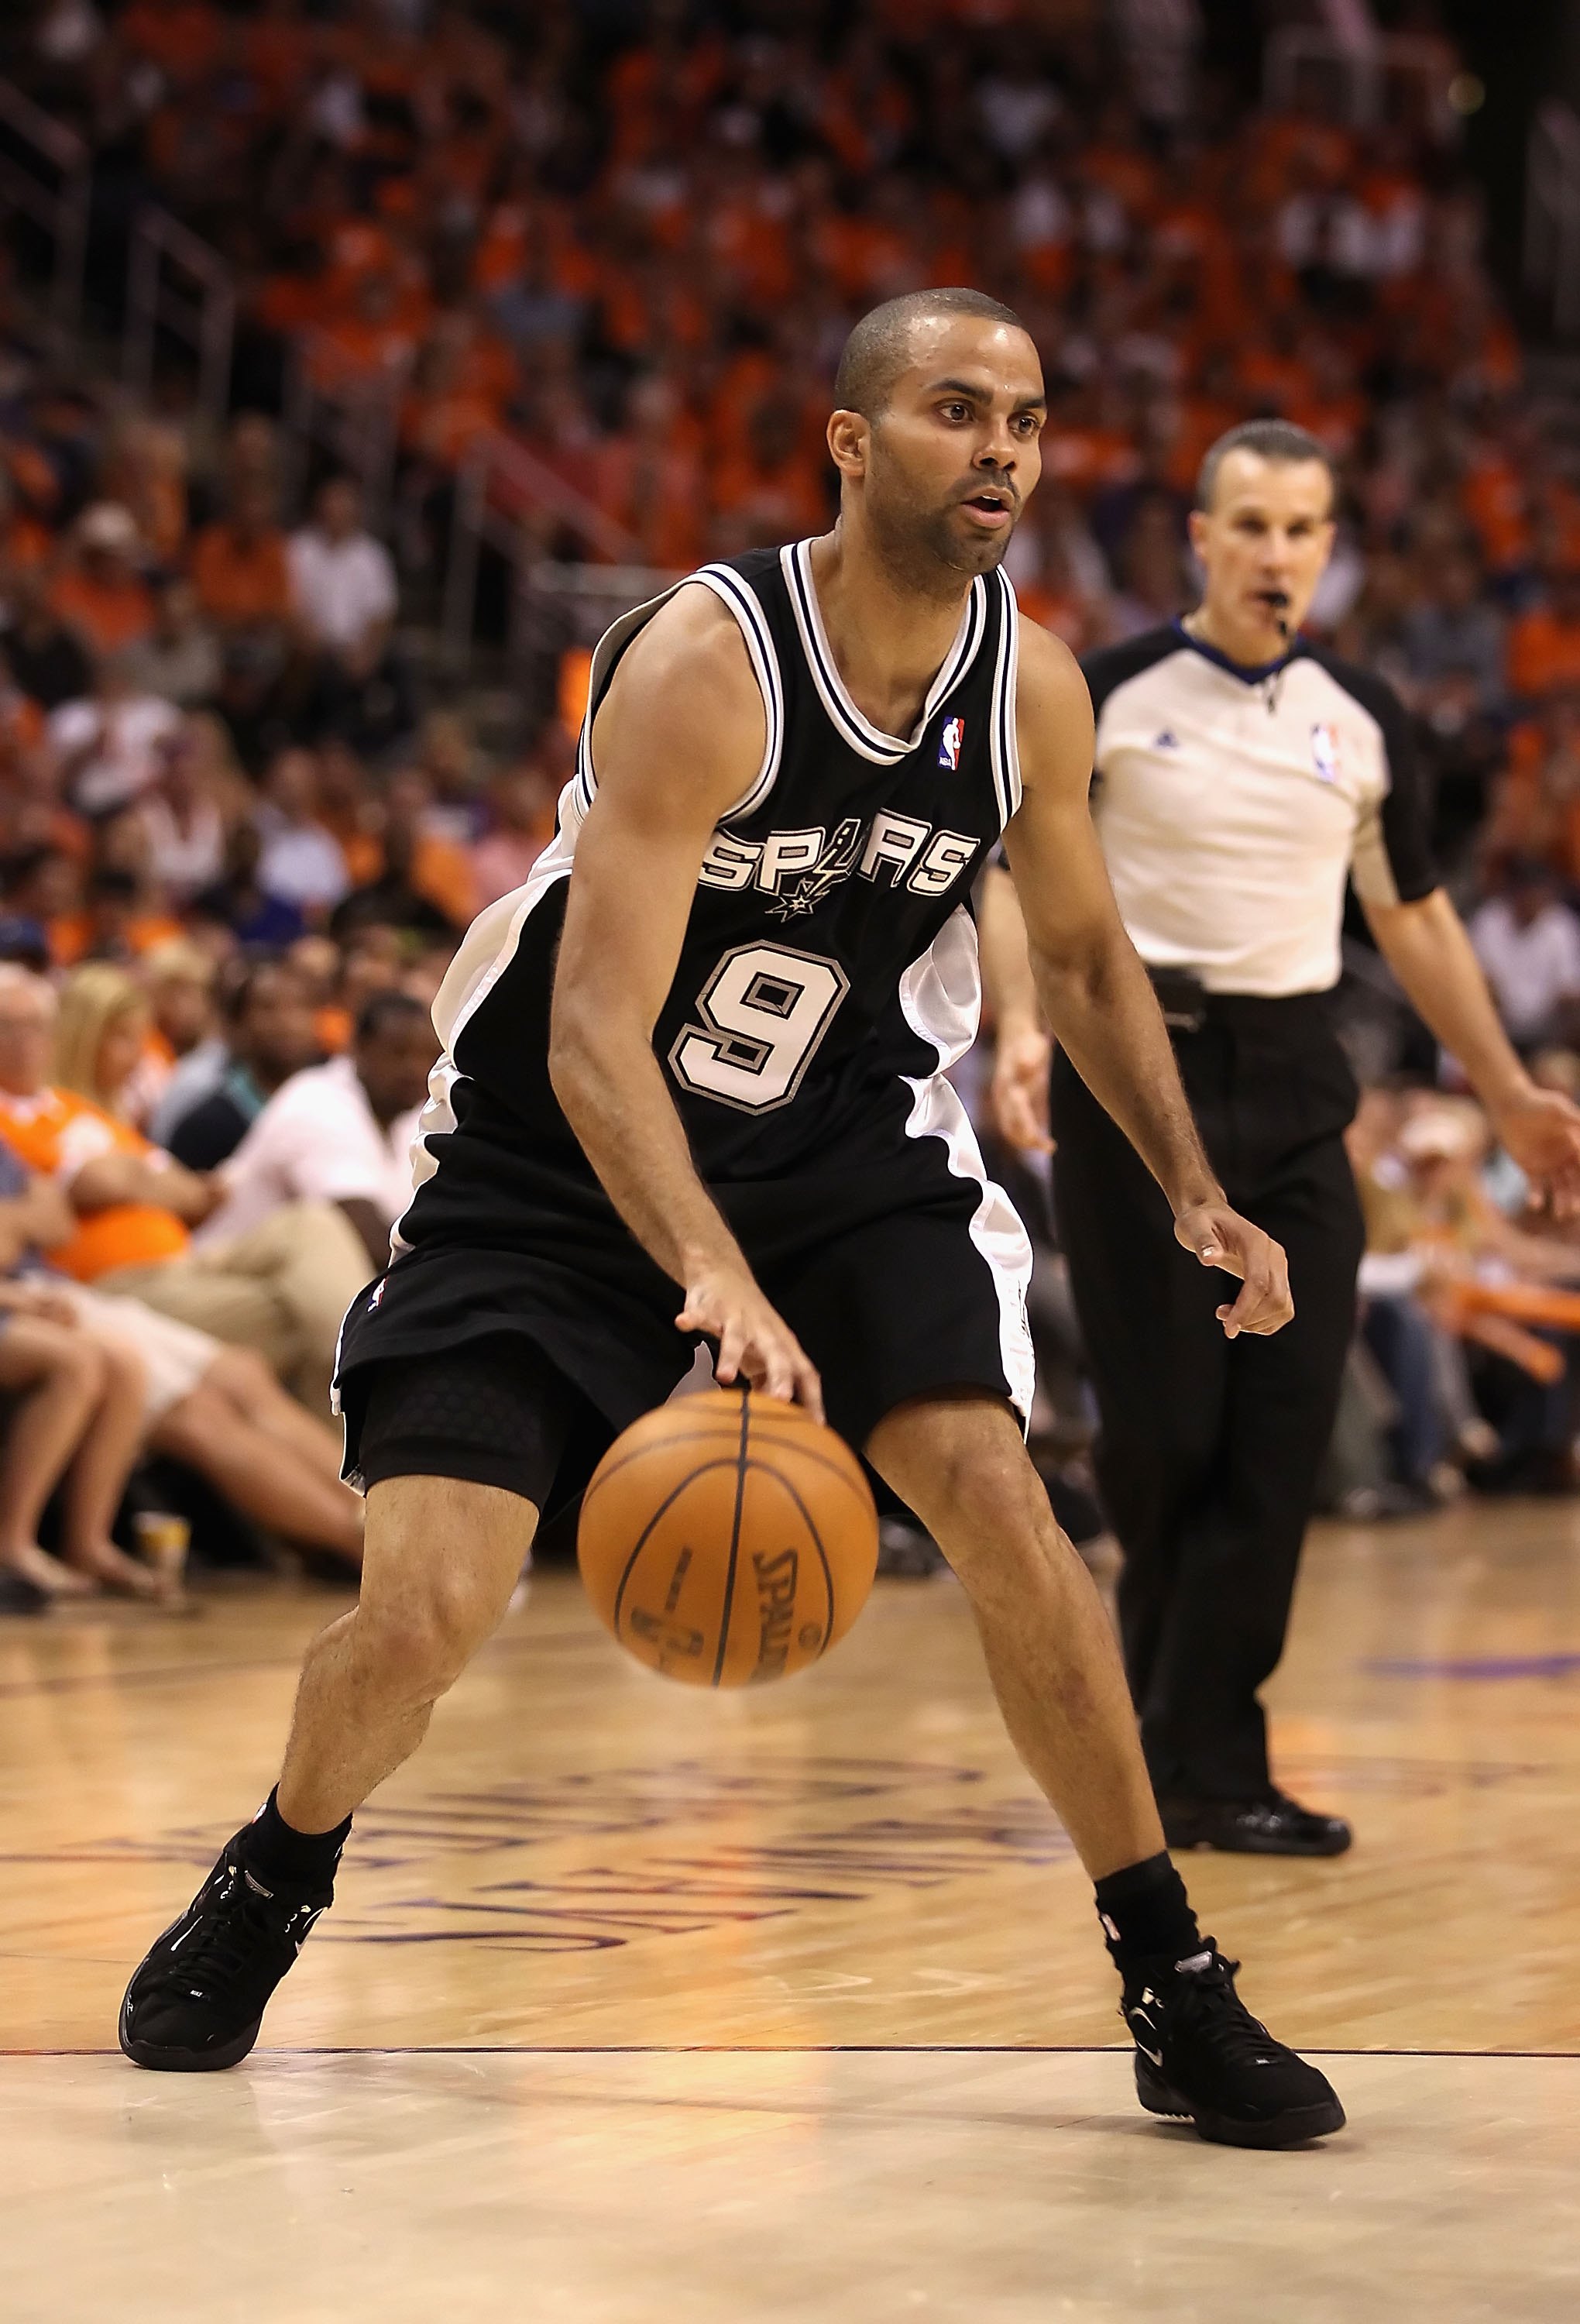 Tony Parker signs (another) contract extension with Spurs - NBC Sports